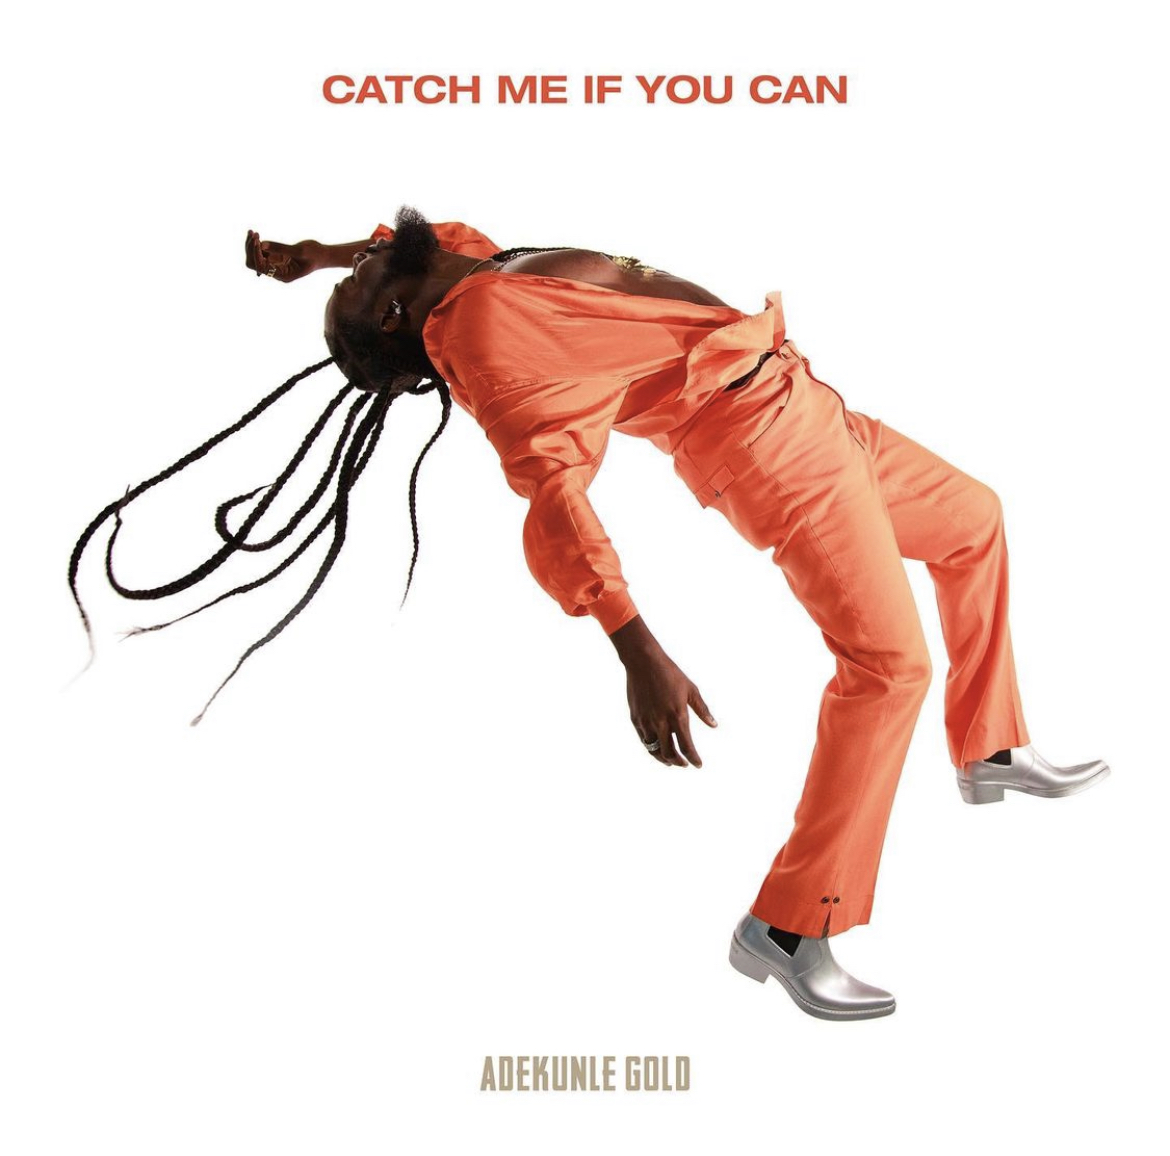 Adekunle Gold Releases Fourth Studio Album ‘Catch Me If You Can’